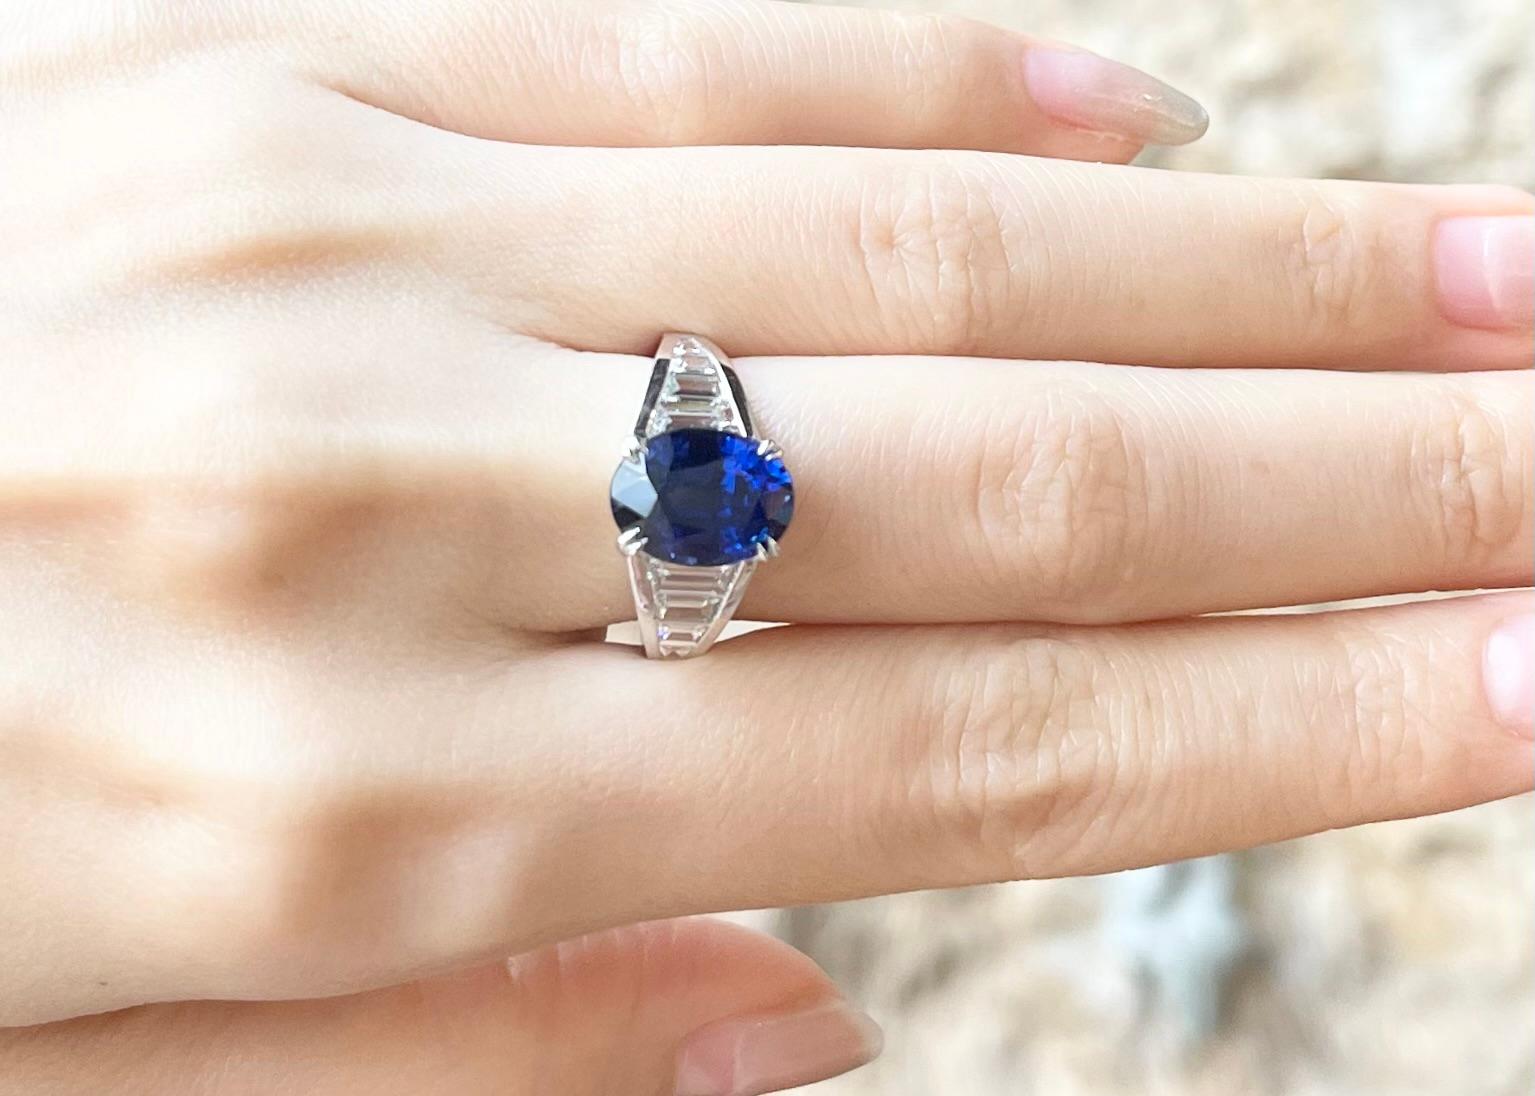 Royal Blue Sapphire 5.02 carats with Diamond 0.93 carat Ring set in Platinum 950 Settings

Width:  0.8 cm 
Length: 1.1 cm
Ring Size: 53
Total Weight: 8.66 grams

